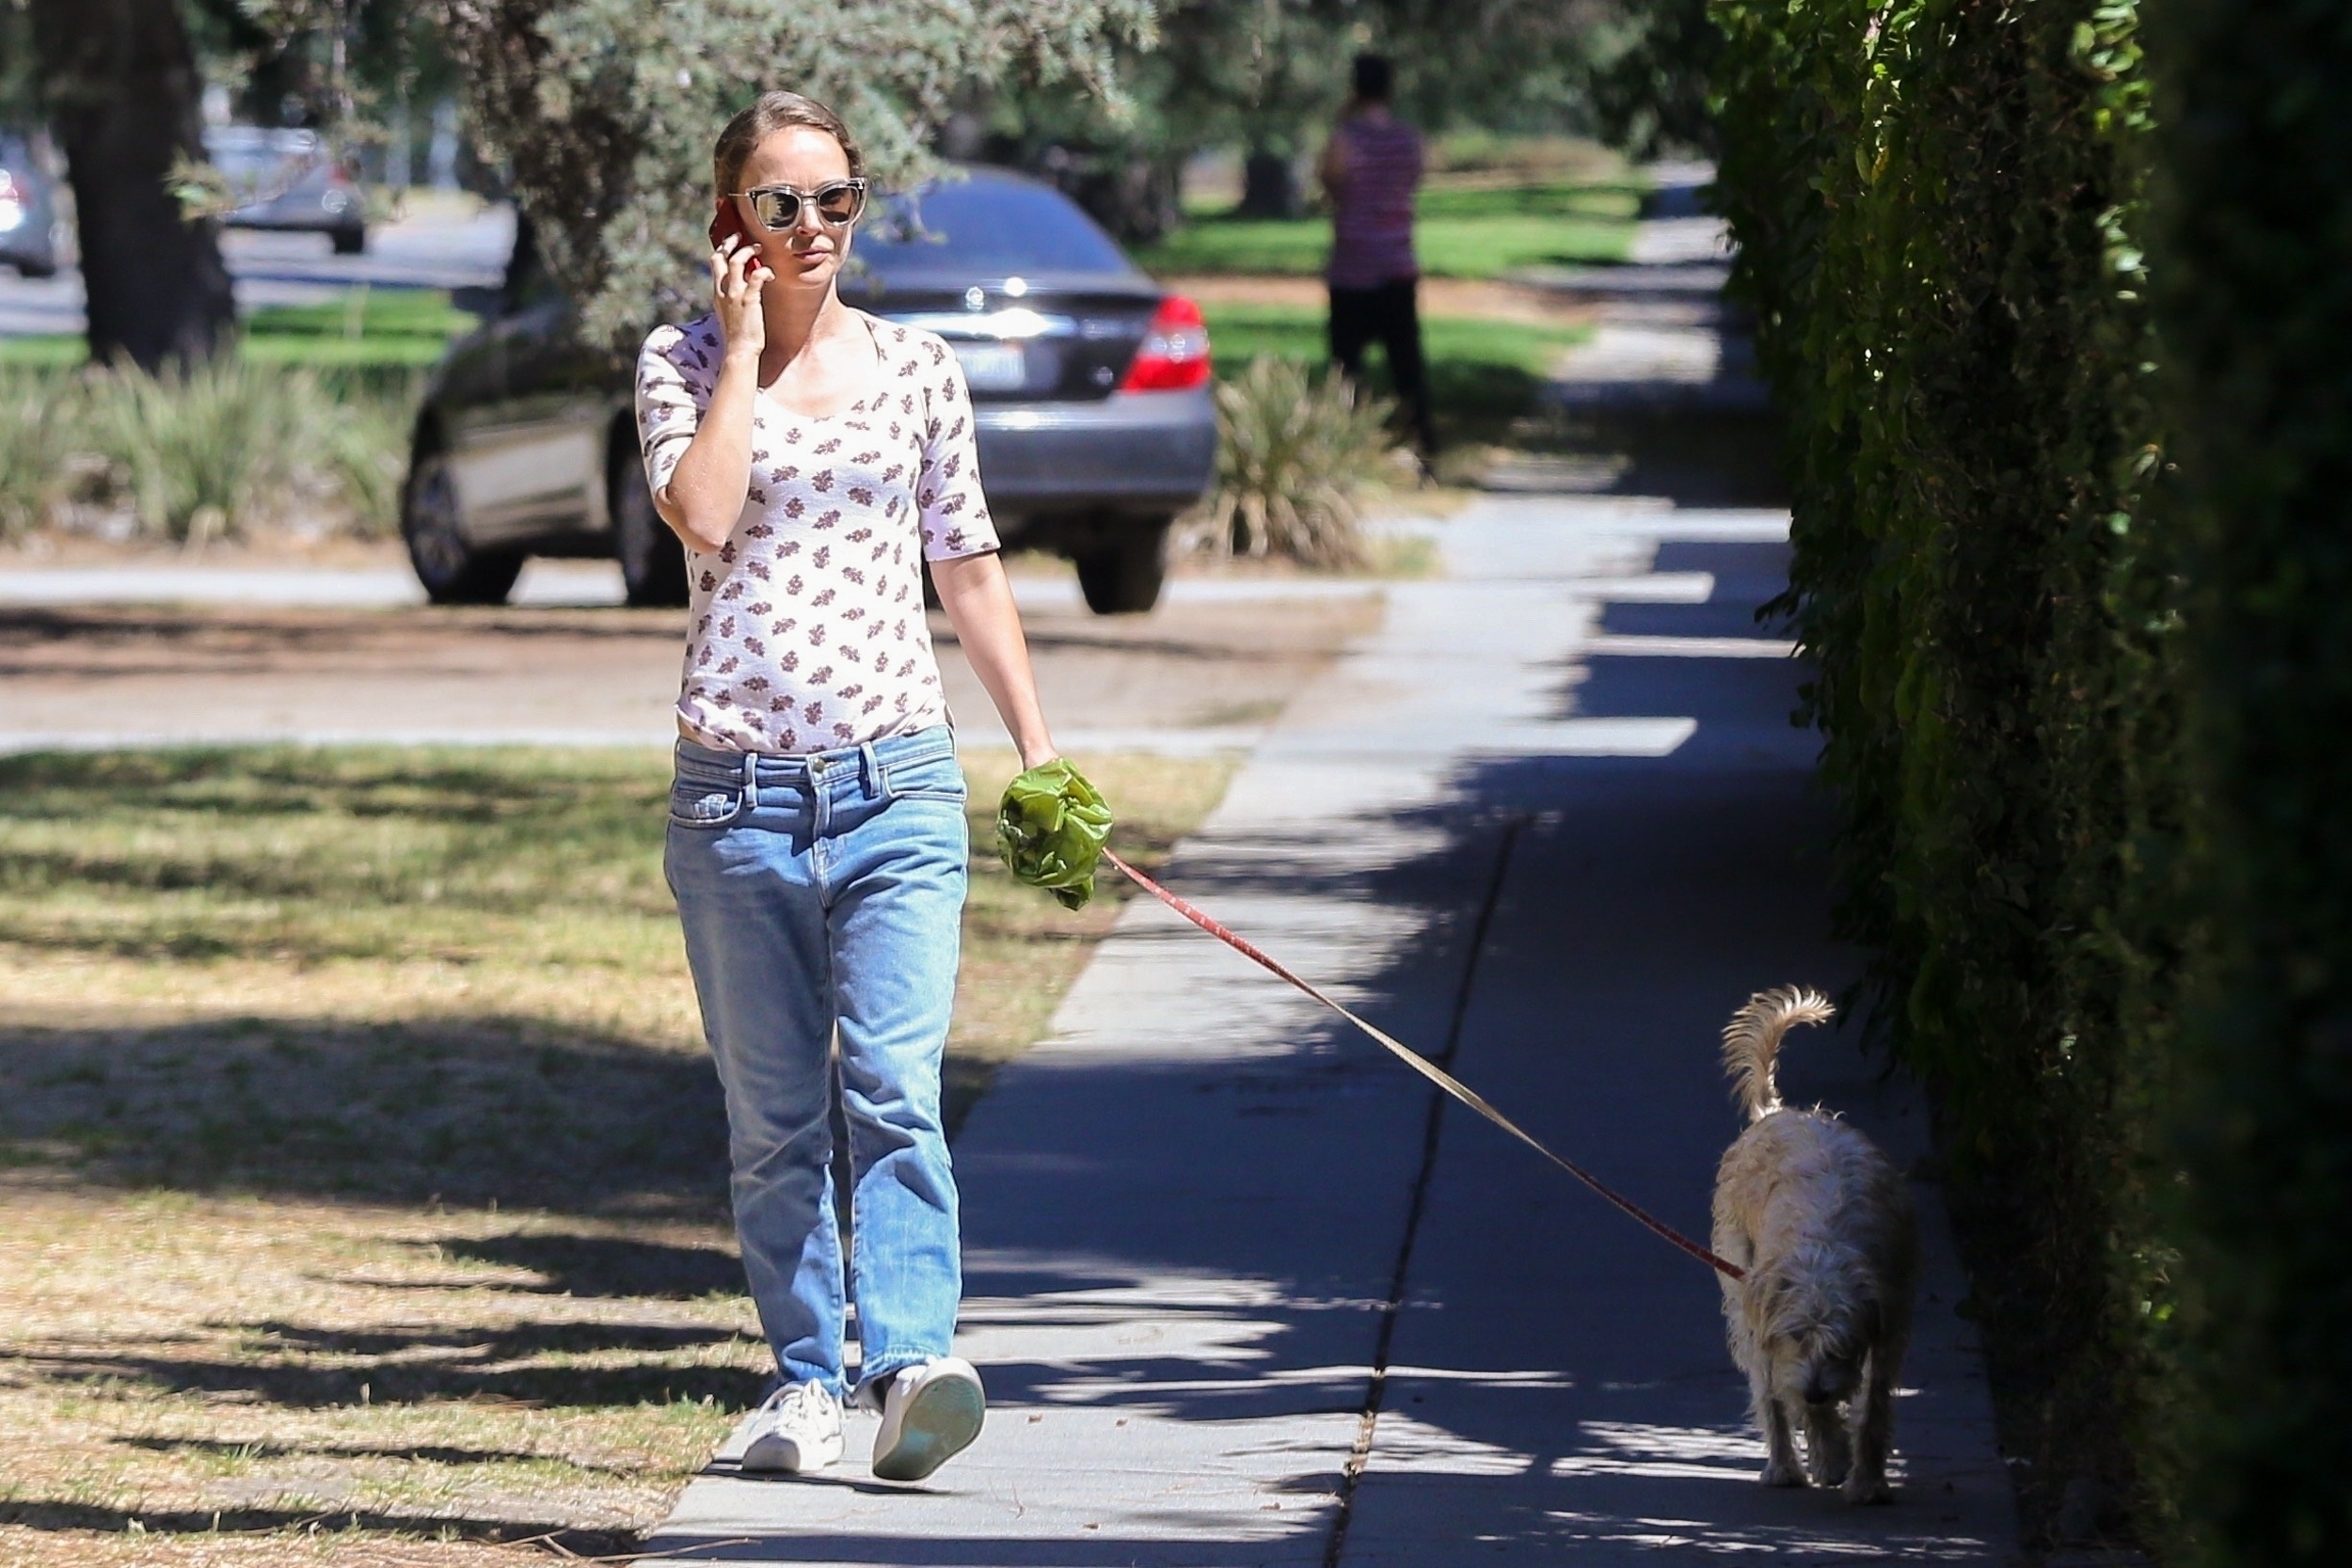 natalie-portman-out-for-a-walk-with-her-dog-near-griffith-park-in-los-feliz-09172018-7.jpg